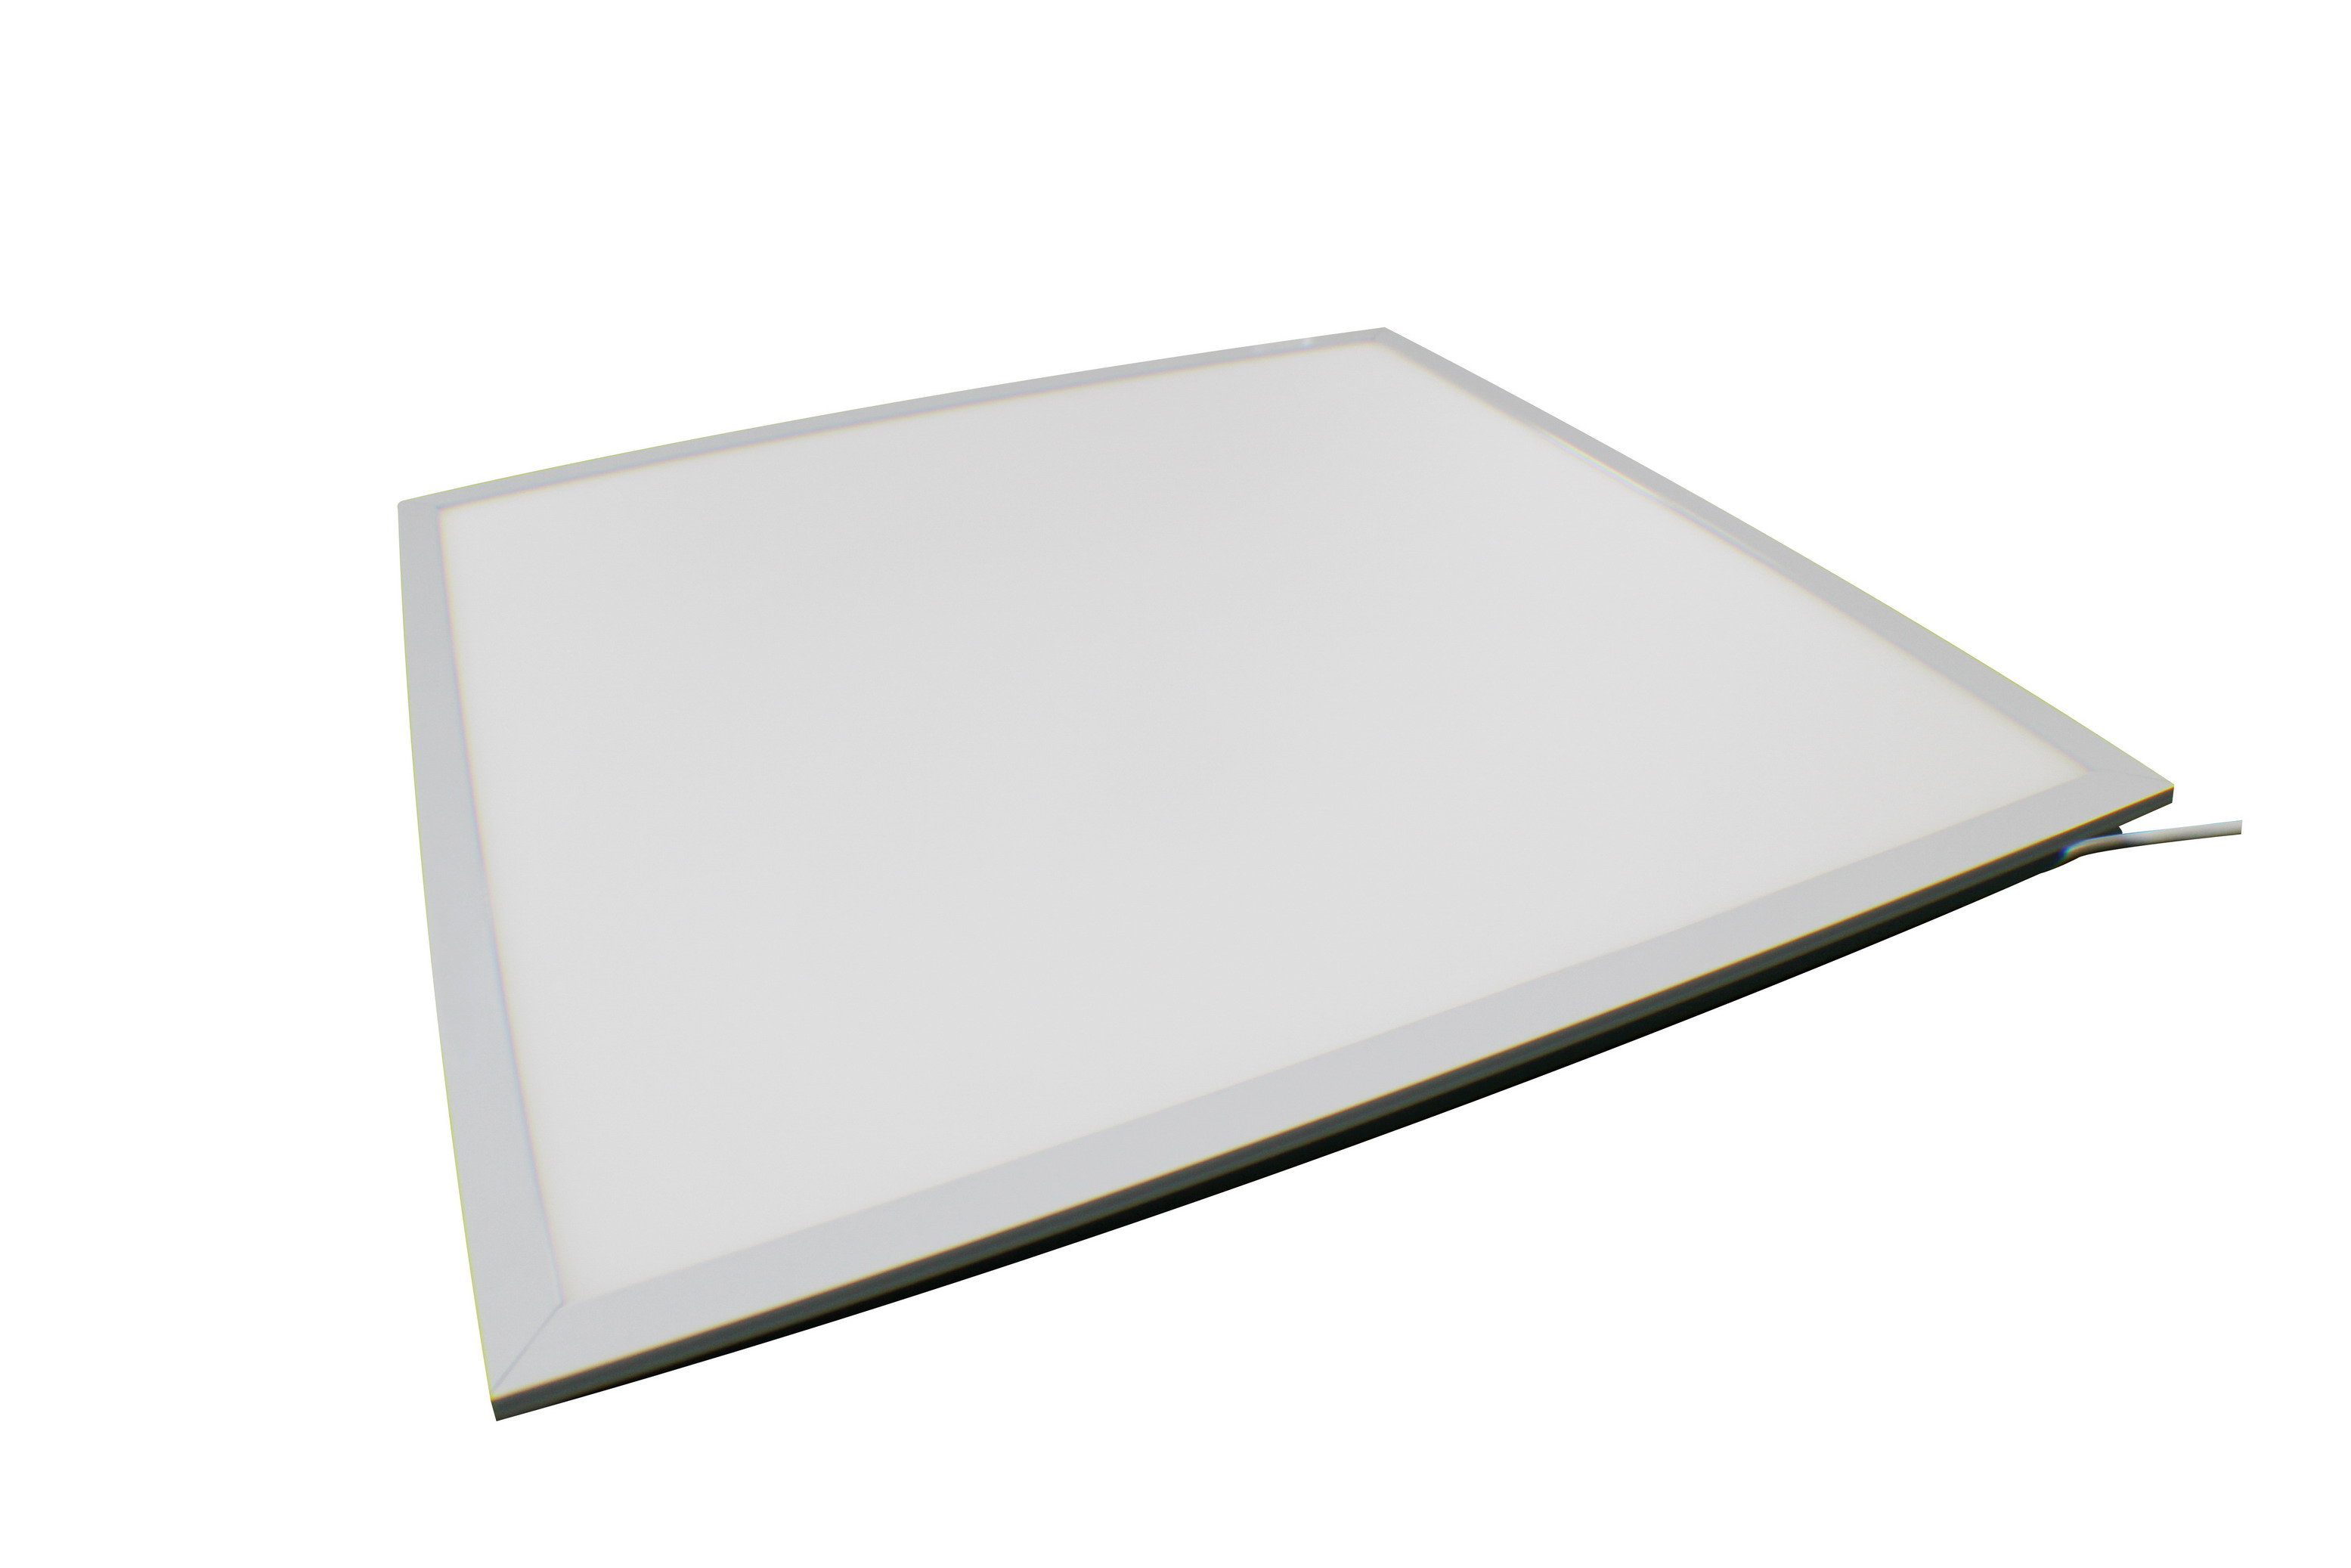 60 x 60 cm Office LED Panel Light 36w commercial lighting products